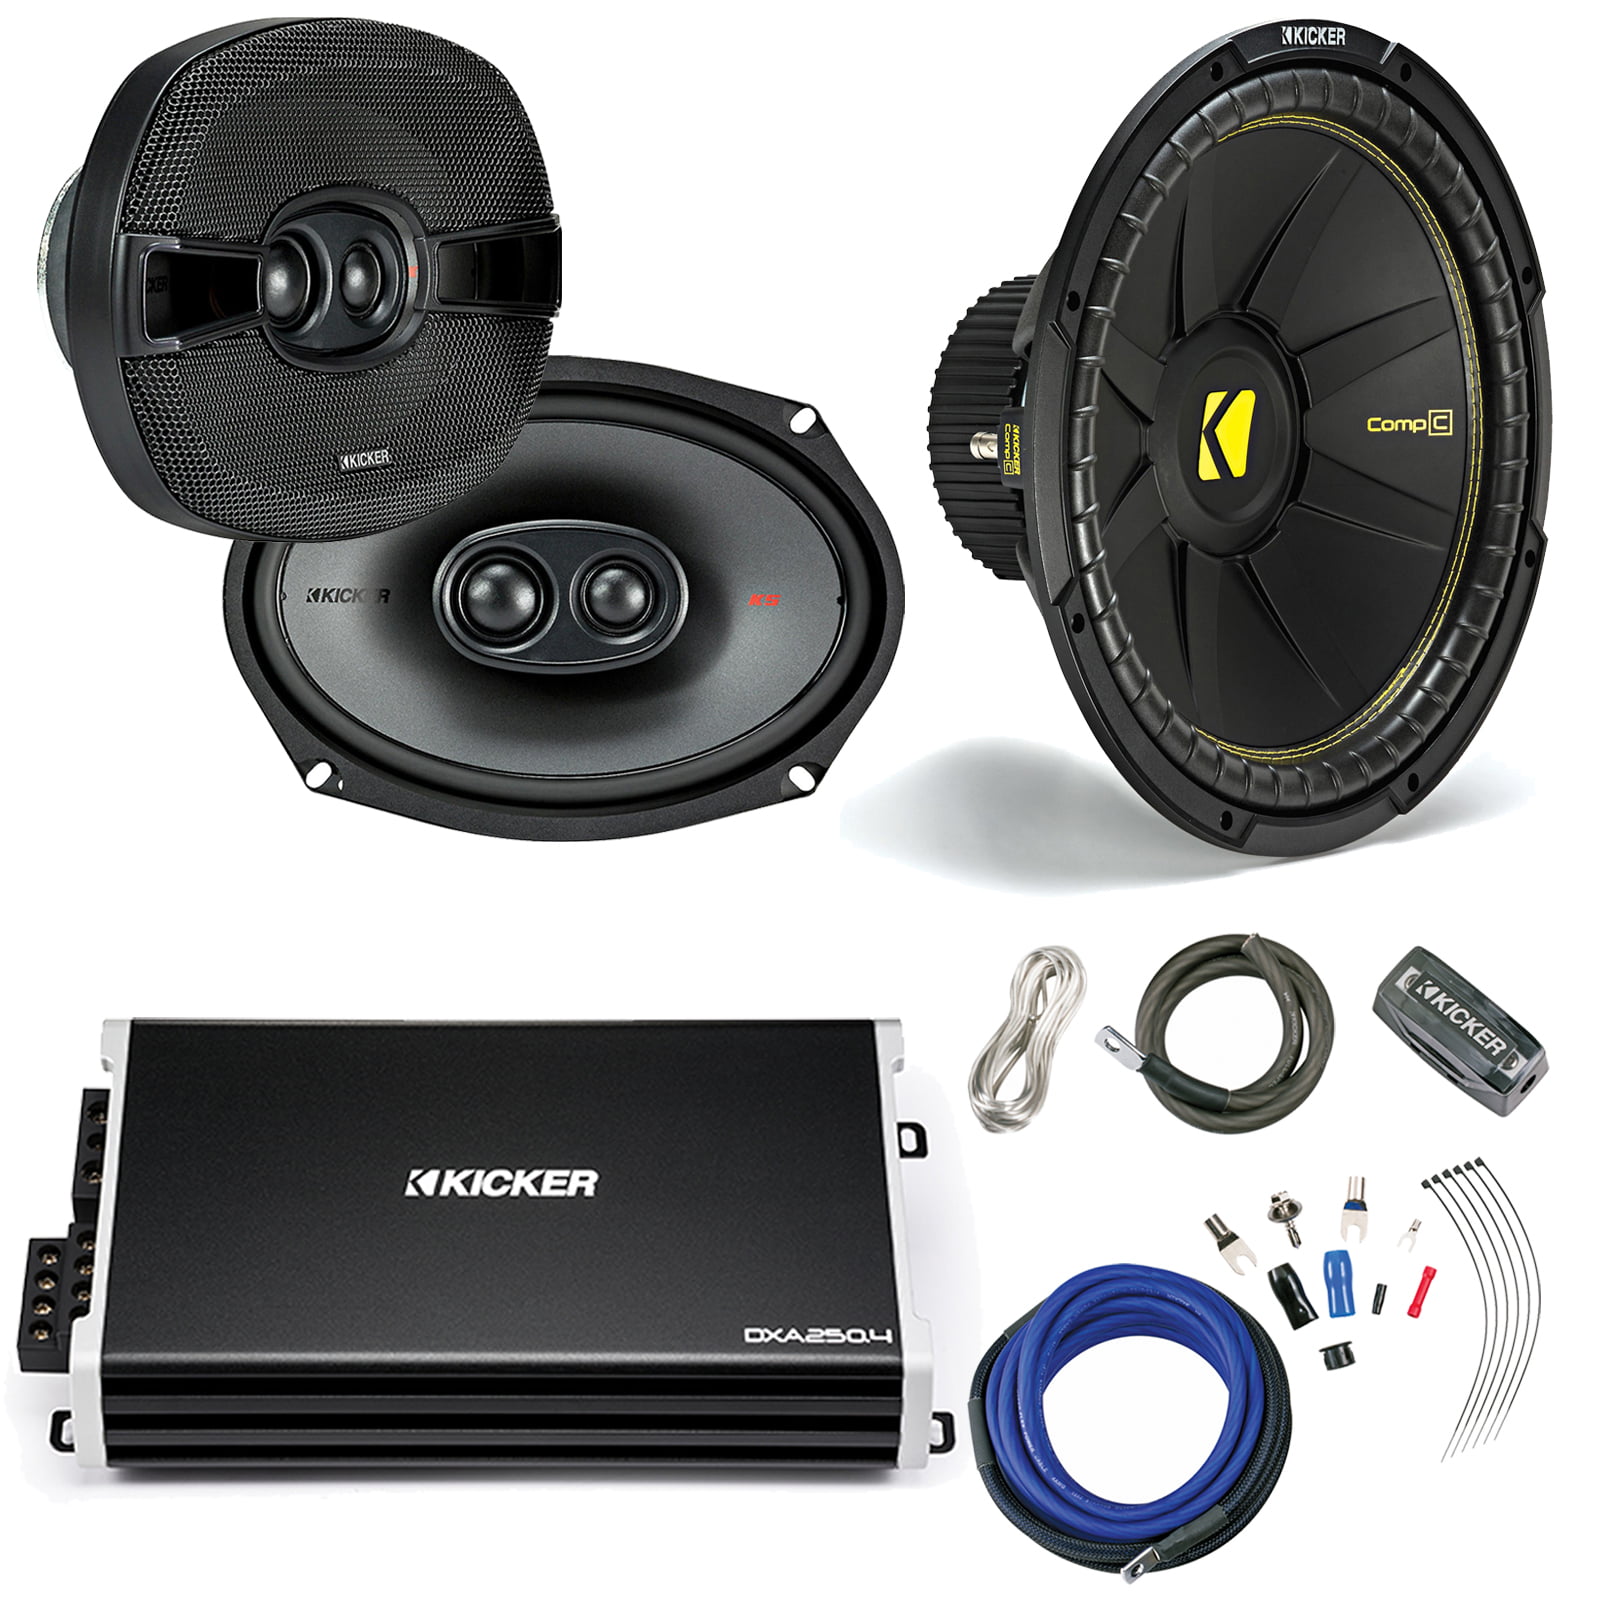 NEW 15" AB SVC Subwoofer Bass.Replacement.Speaker.4ohm.Car Audio Sub.1000w. 